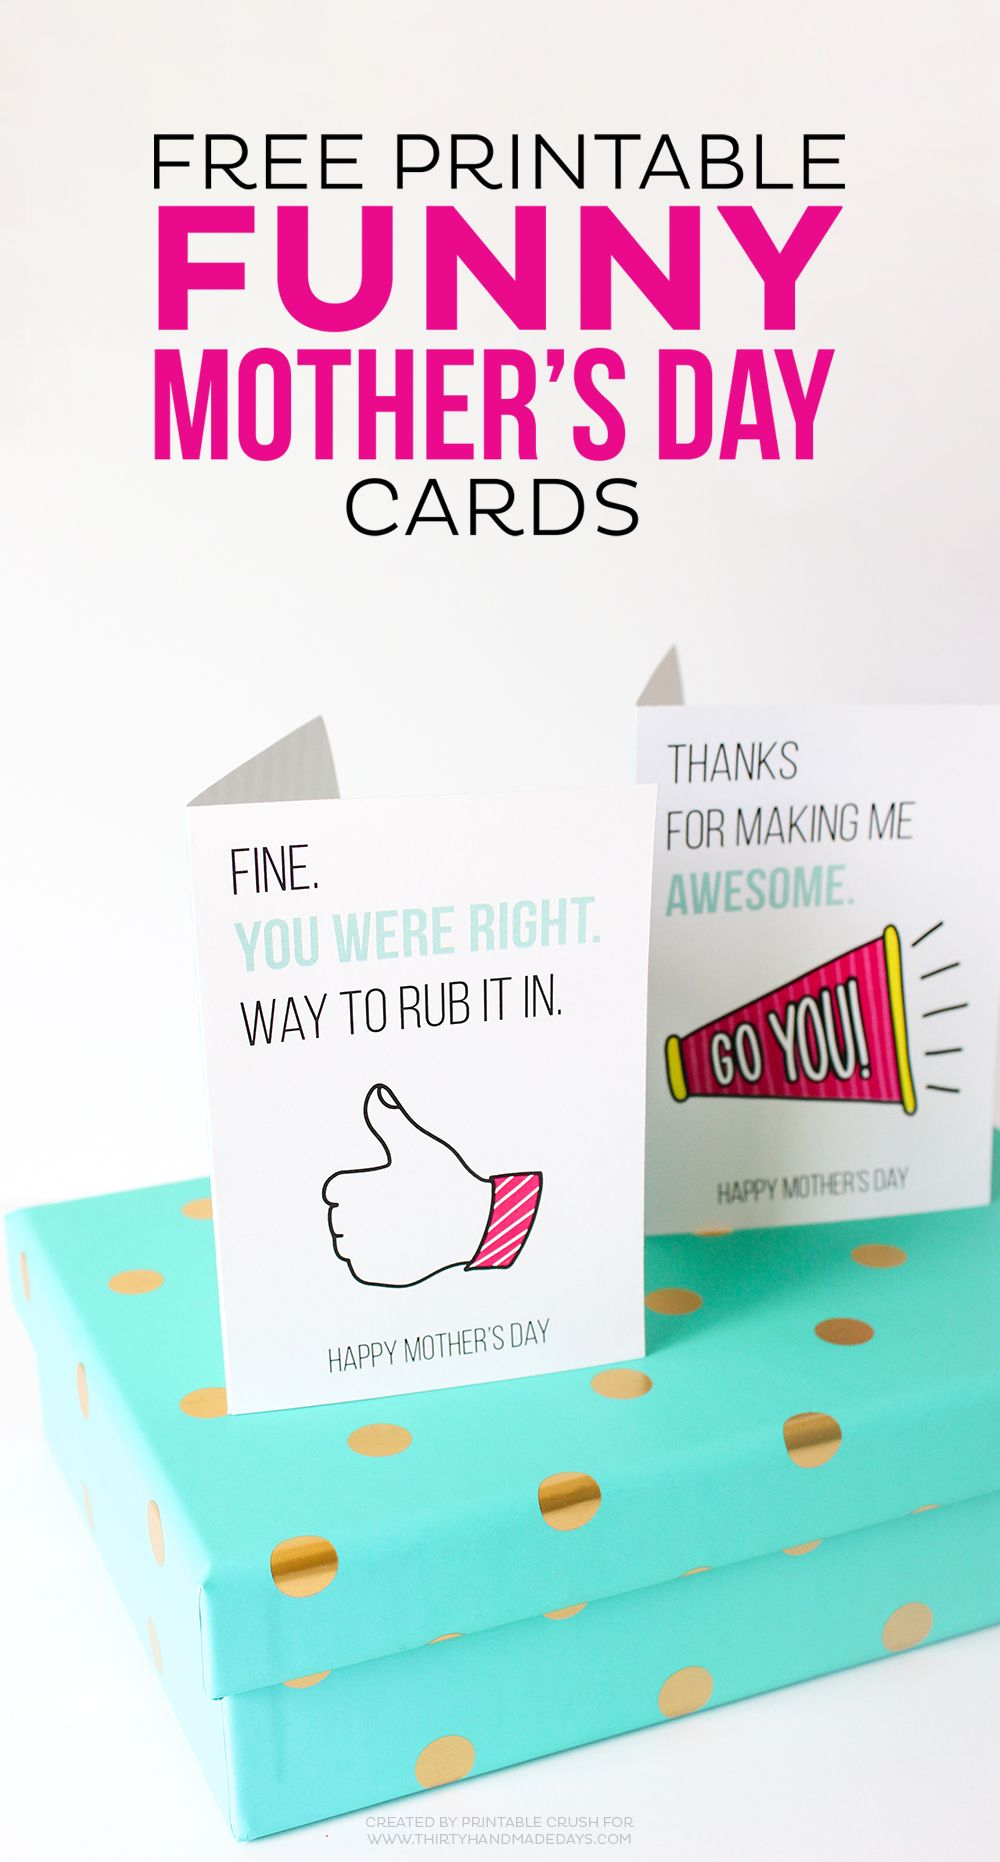 Printable Funny Mother&amp;#039;s Day Cards | All Things Printable - Free Printable Funny Mother&amp;#039;s Day Cards